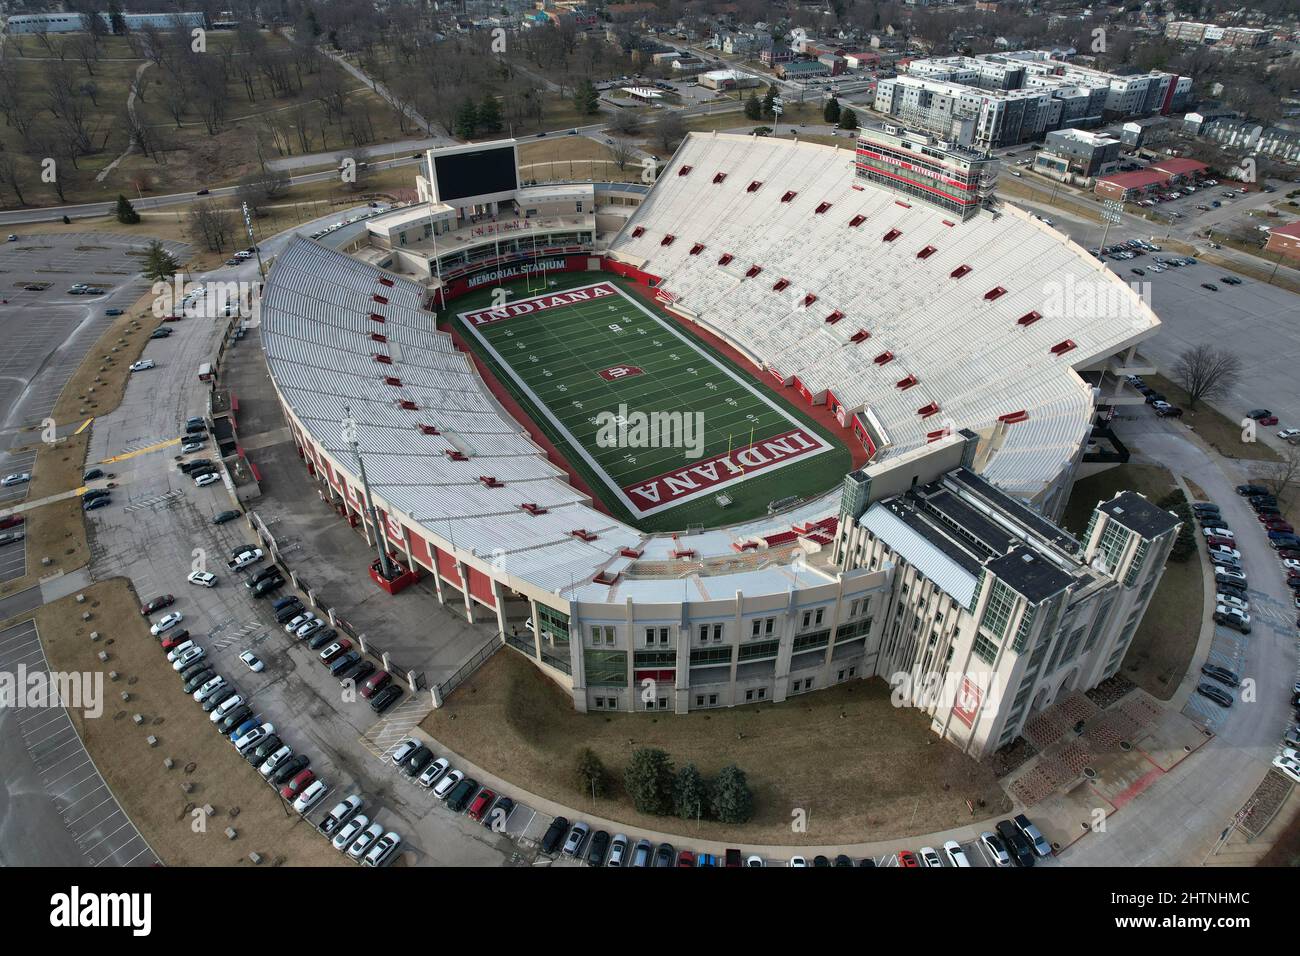 An aerial view of Memorial Stadium on the campus of Indiana University, Monday, Mar. 1, 2022, in Bloomington, Ind. The stadium is the home of the Indi Stock Photo